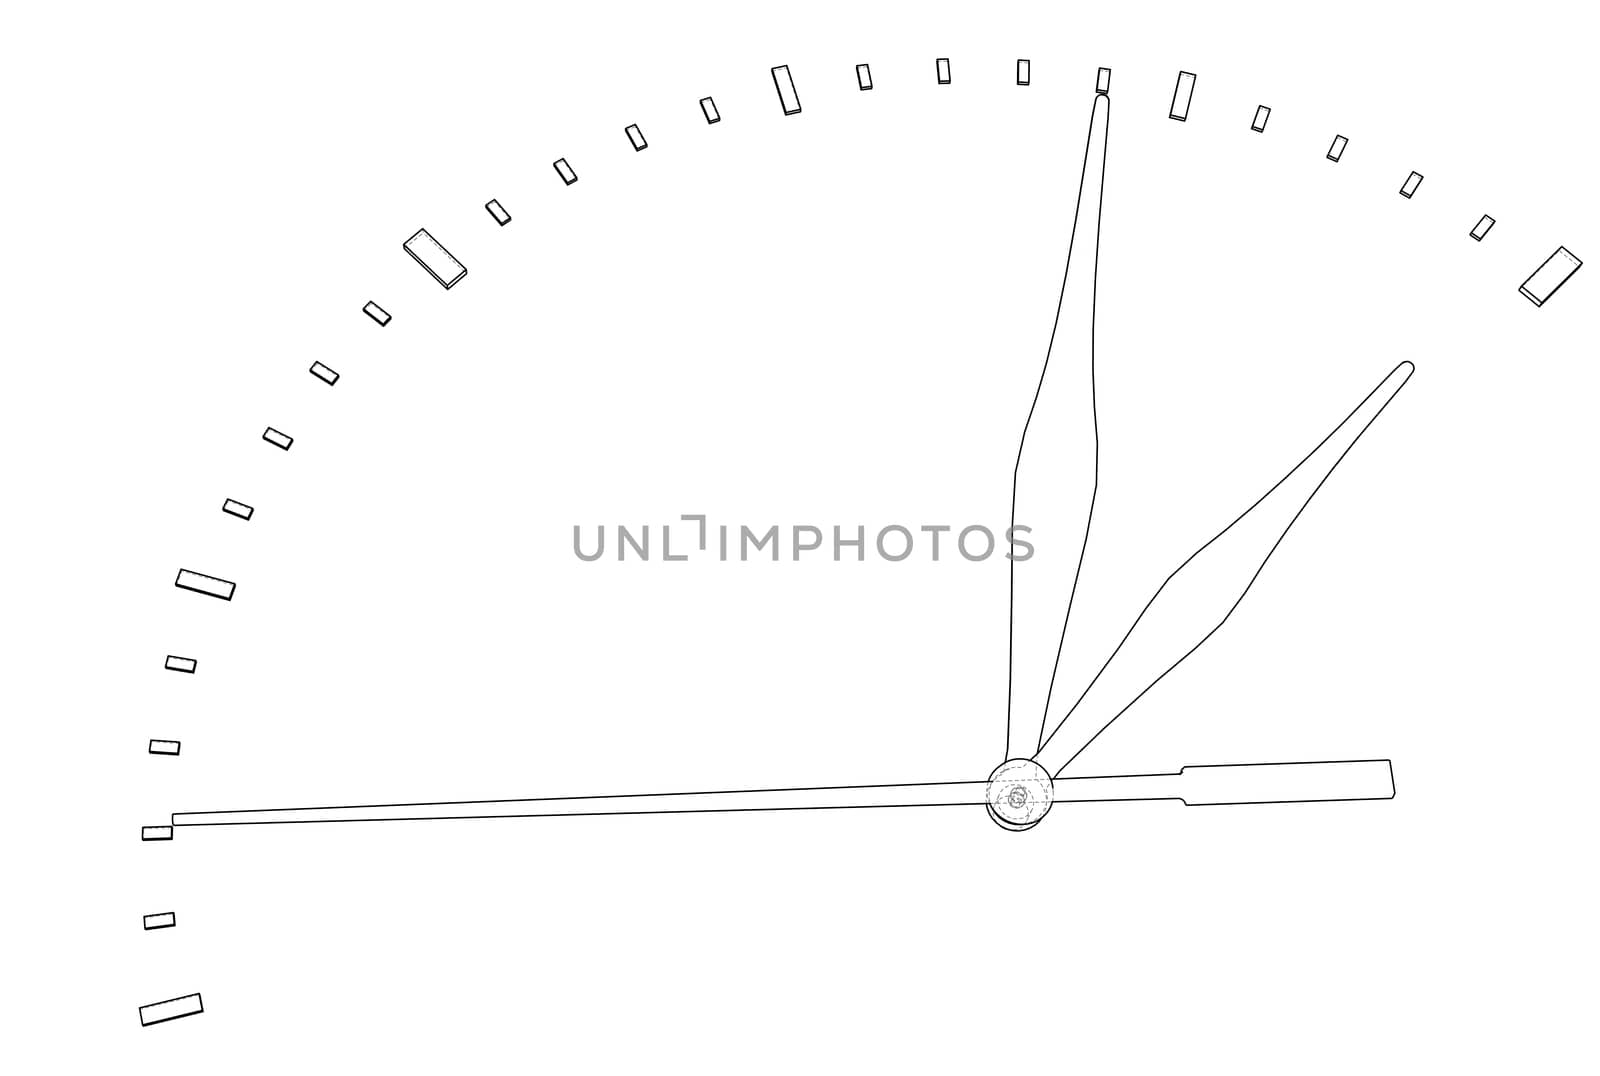 Clock face. Perspective view. 3d illustration. Wire-frame style